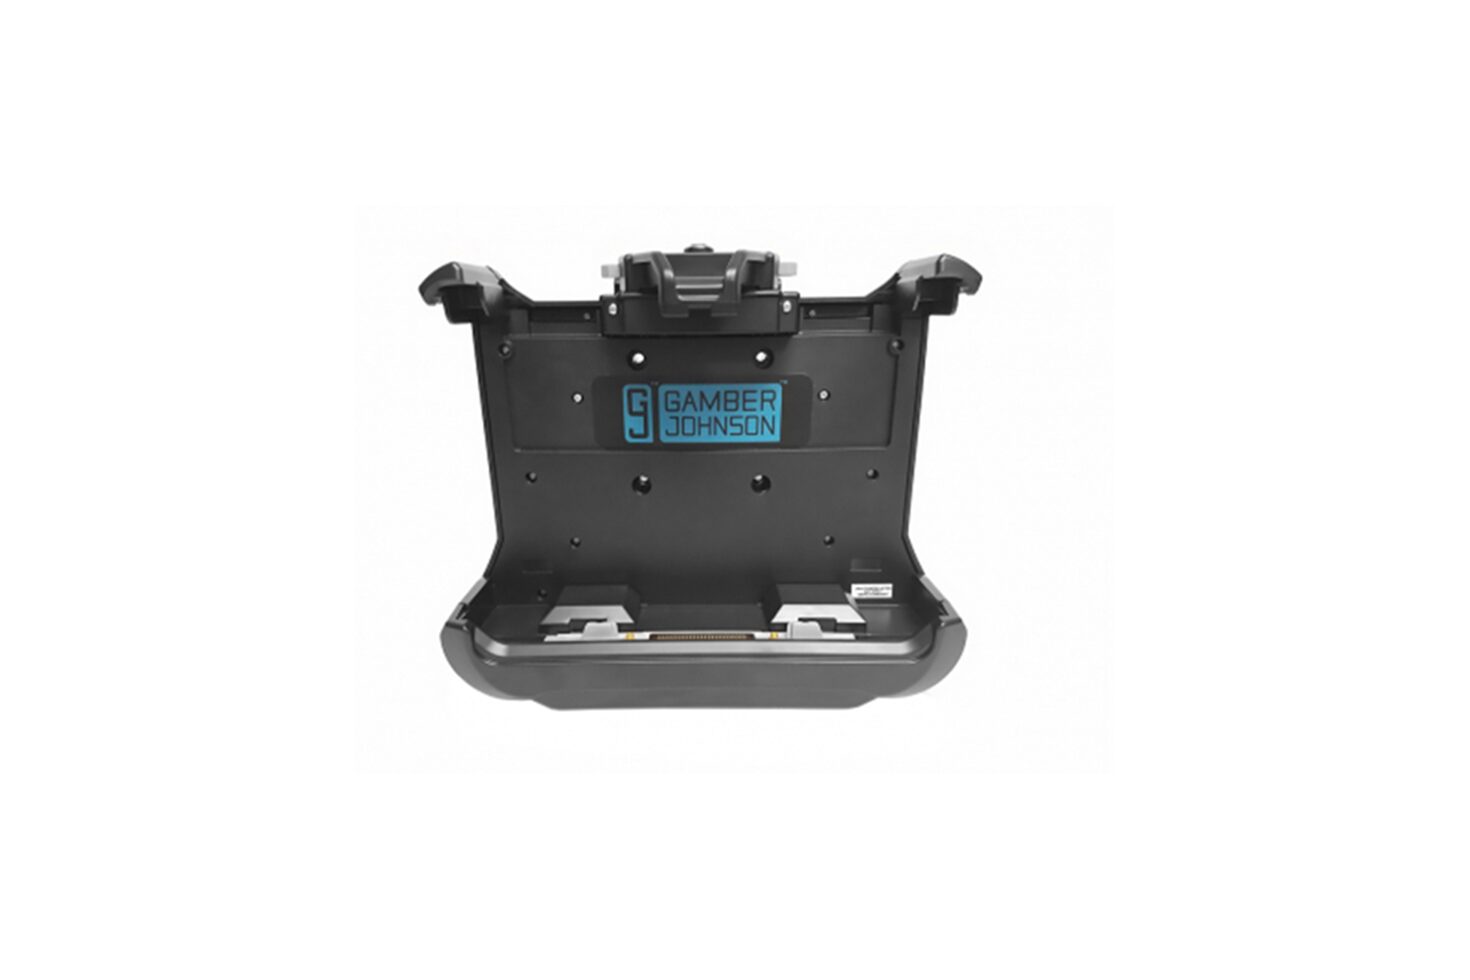 Expanded Vehicle Dock for TOUGHBOOK 20 Tablet (Gamber Johnson)